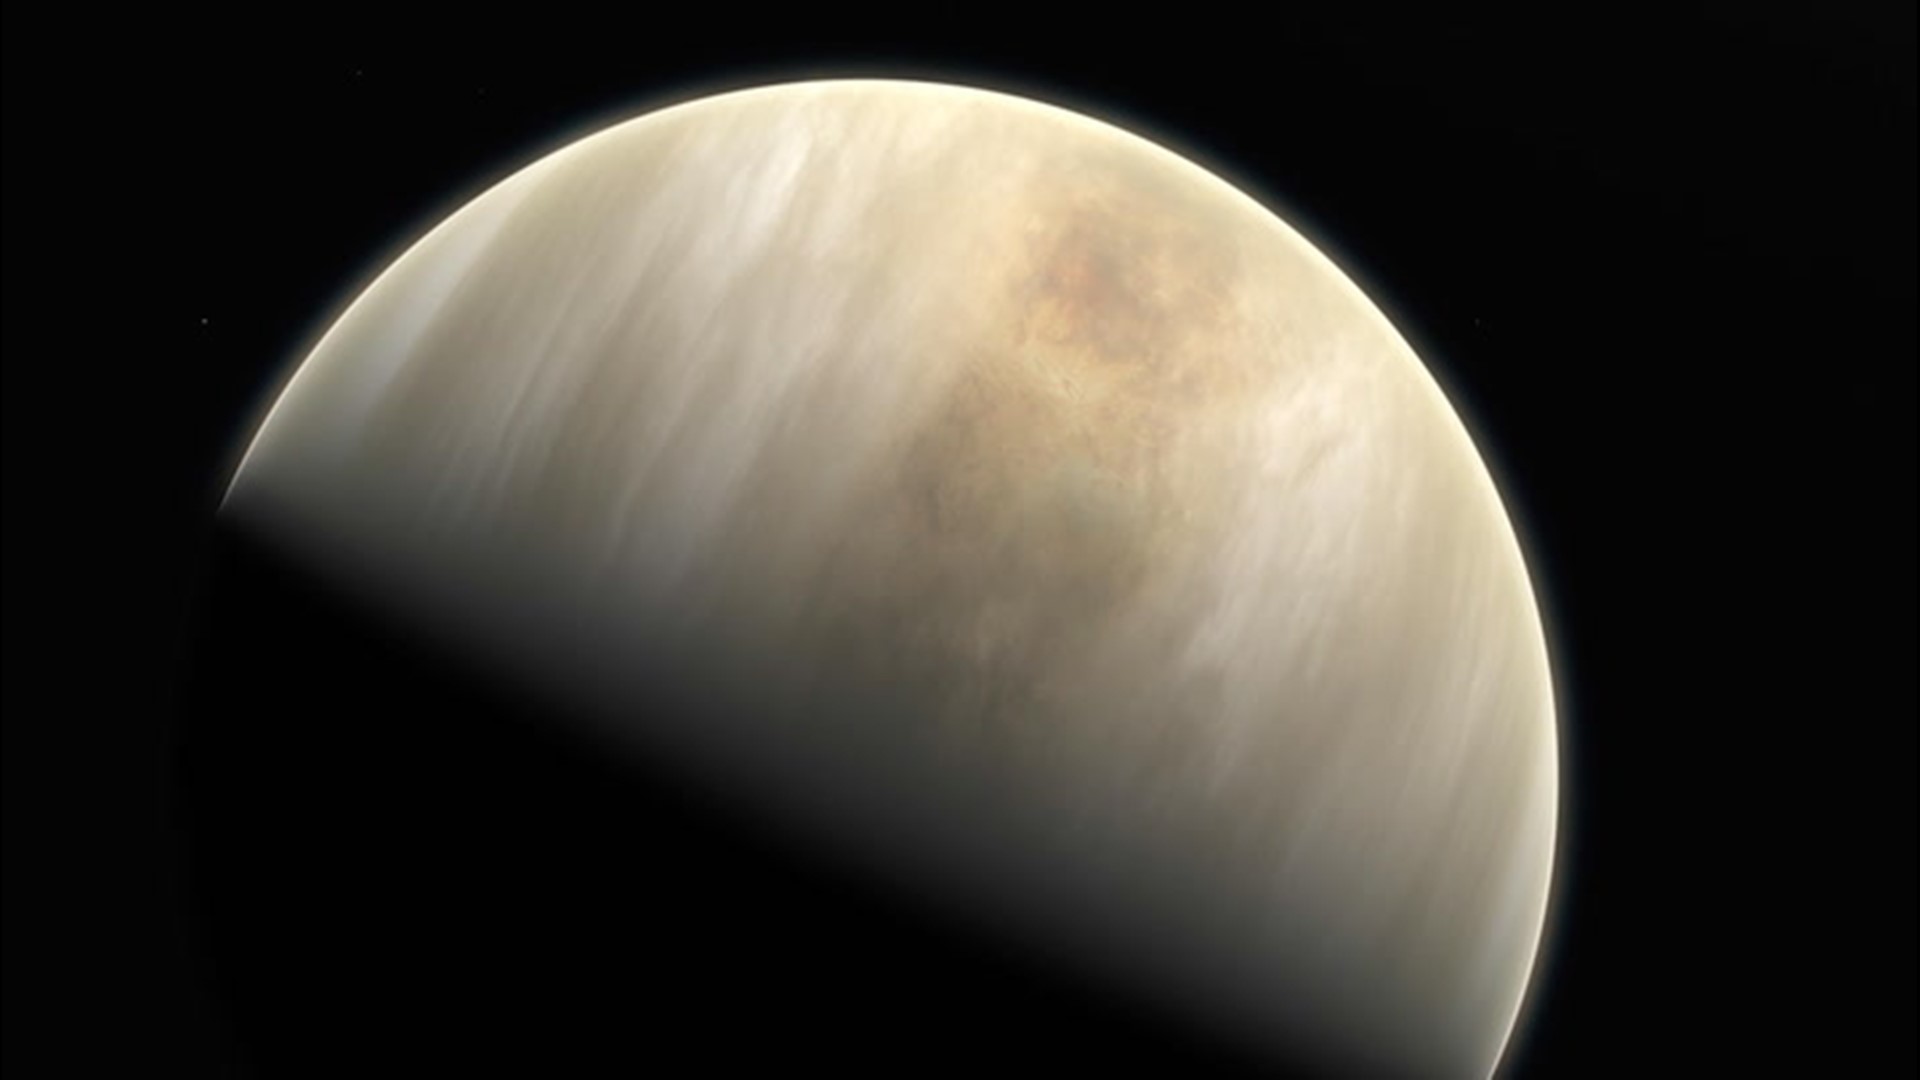 Scientists announced on Sept. 14, they found traces of phosphine, a biosignature gas, high in Venus' atmosphere, suggesting possible life in the clouds.